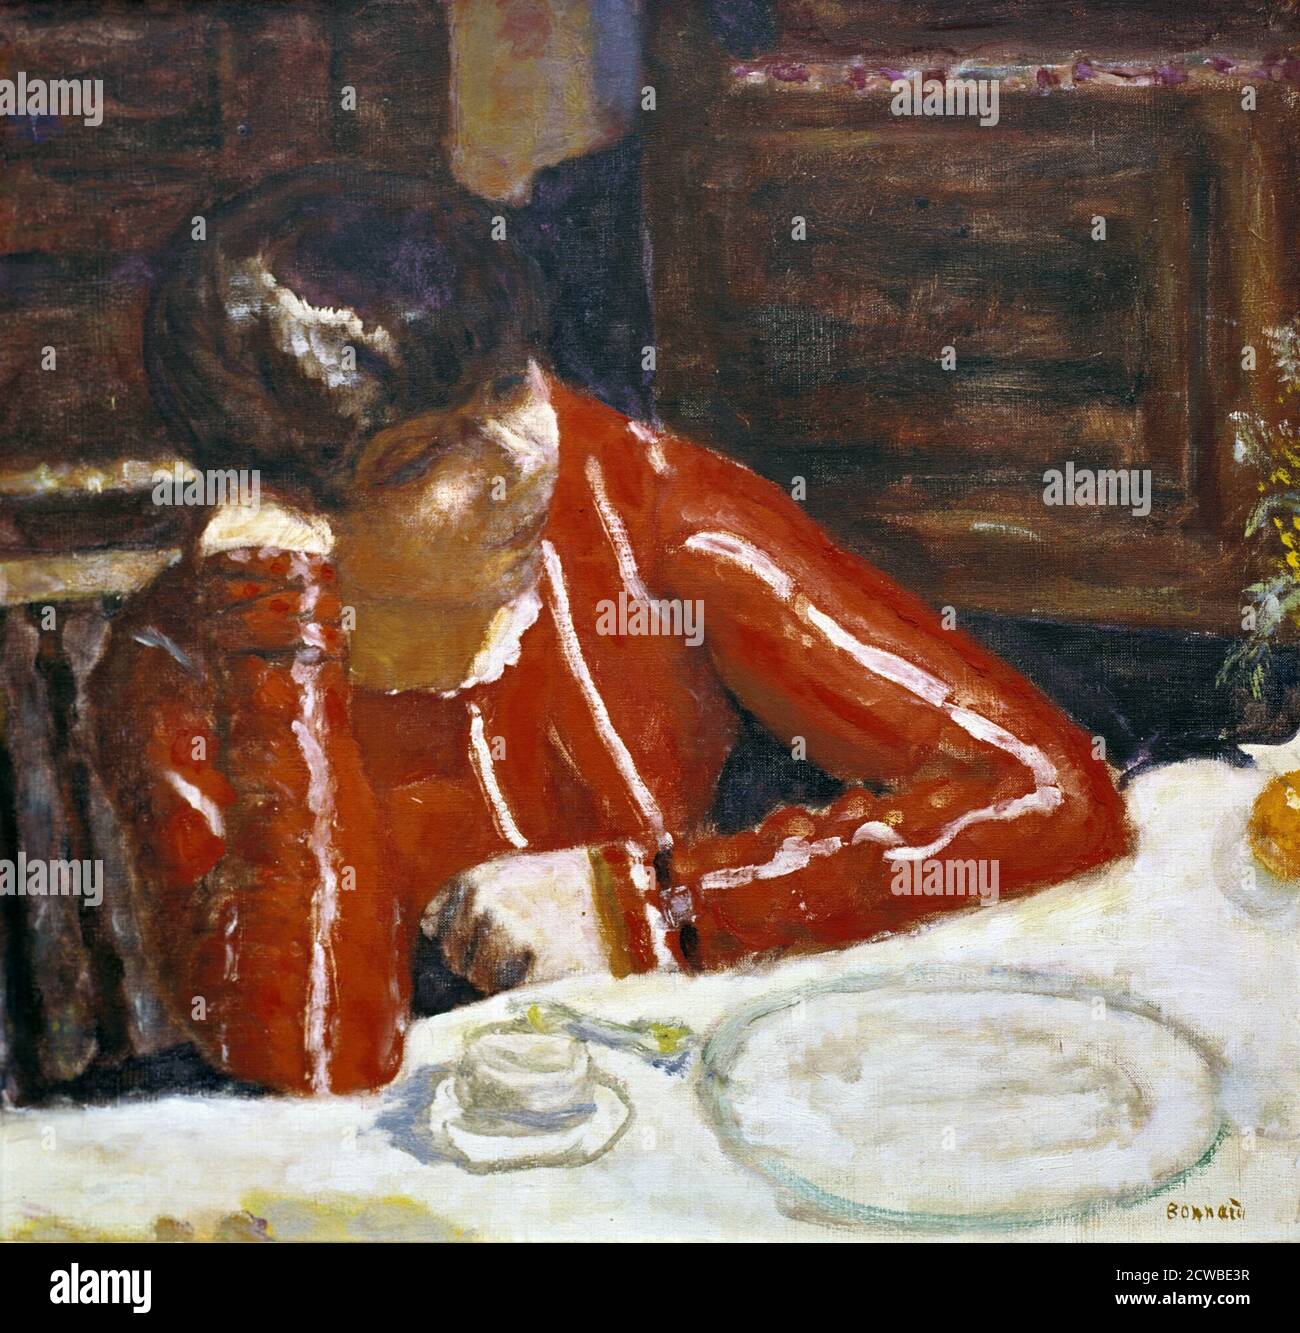 Woman in Red Top', c1920. Artist: Pierre Bonnard. Bonnard was a French painter, illustrator, and printmaker, known for the stylized decorative qualities of his paintings and his bold use of colour. He was a founding member of the Post-Impressionist group of avant-garde painters Les Nabis. Stock Photo